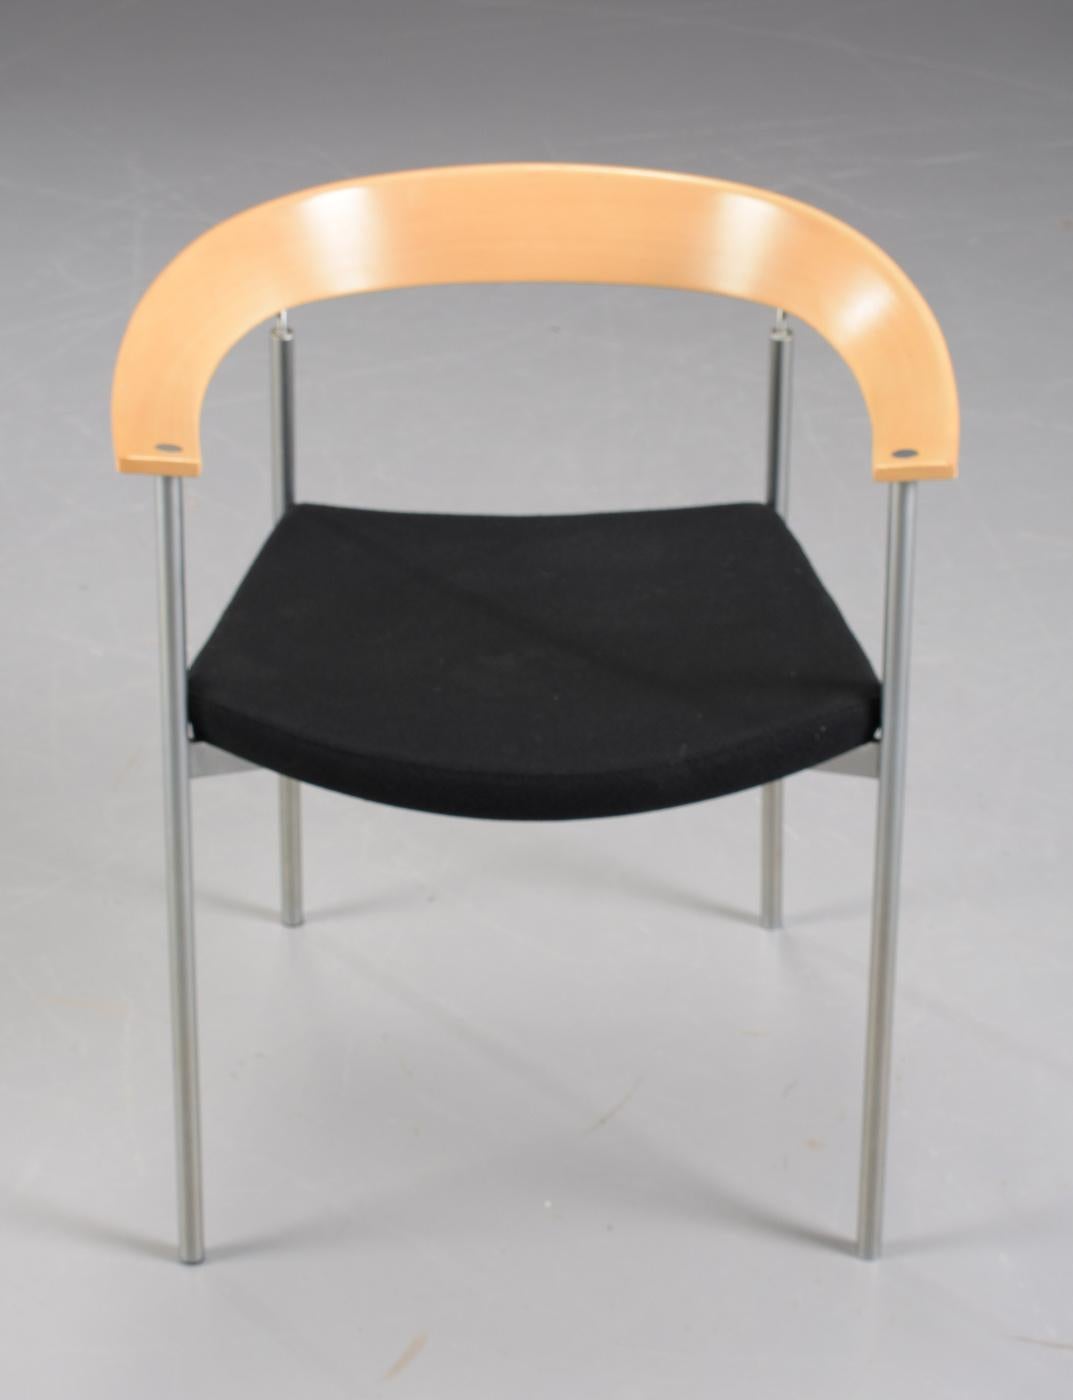 Set of eight Danish stackable Johannes Foersom armchairs designed in 1998 in tube steel, beech, chrome and black leather made by Paustian.

The chairs feature elegant organic round shaped arm- and backrest in beech and frame in tube steel and